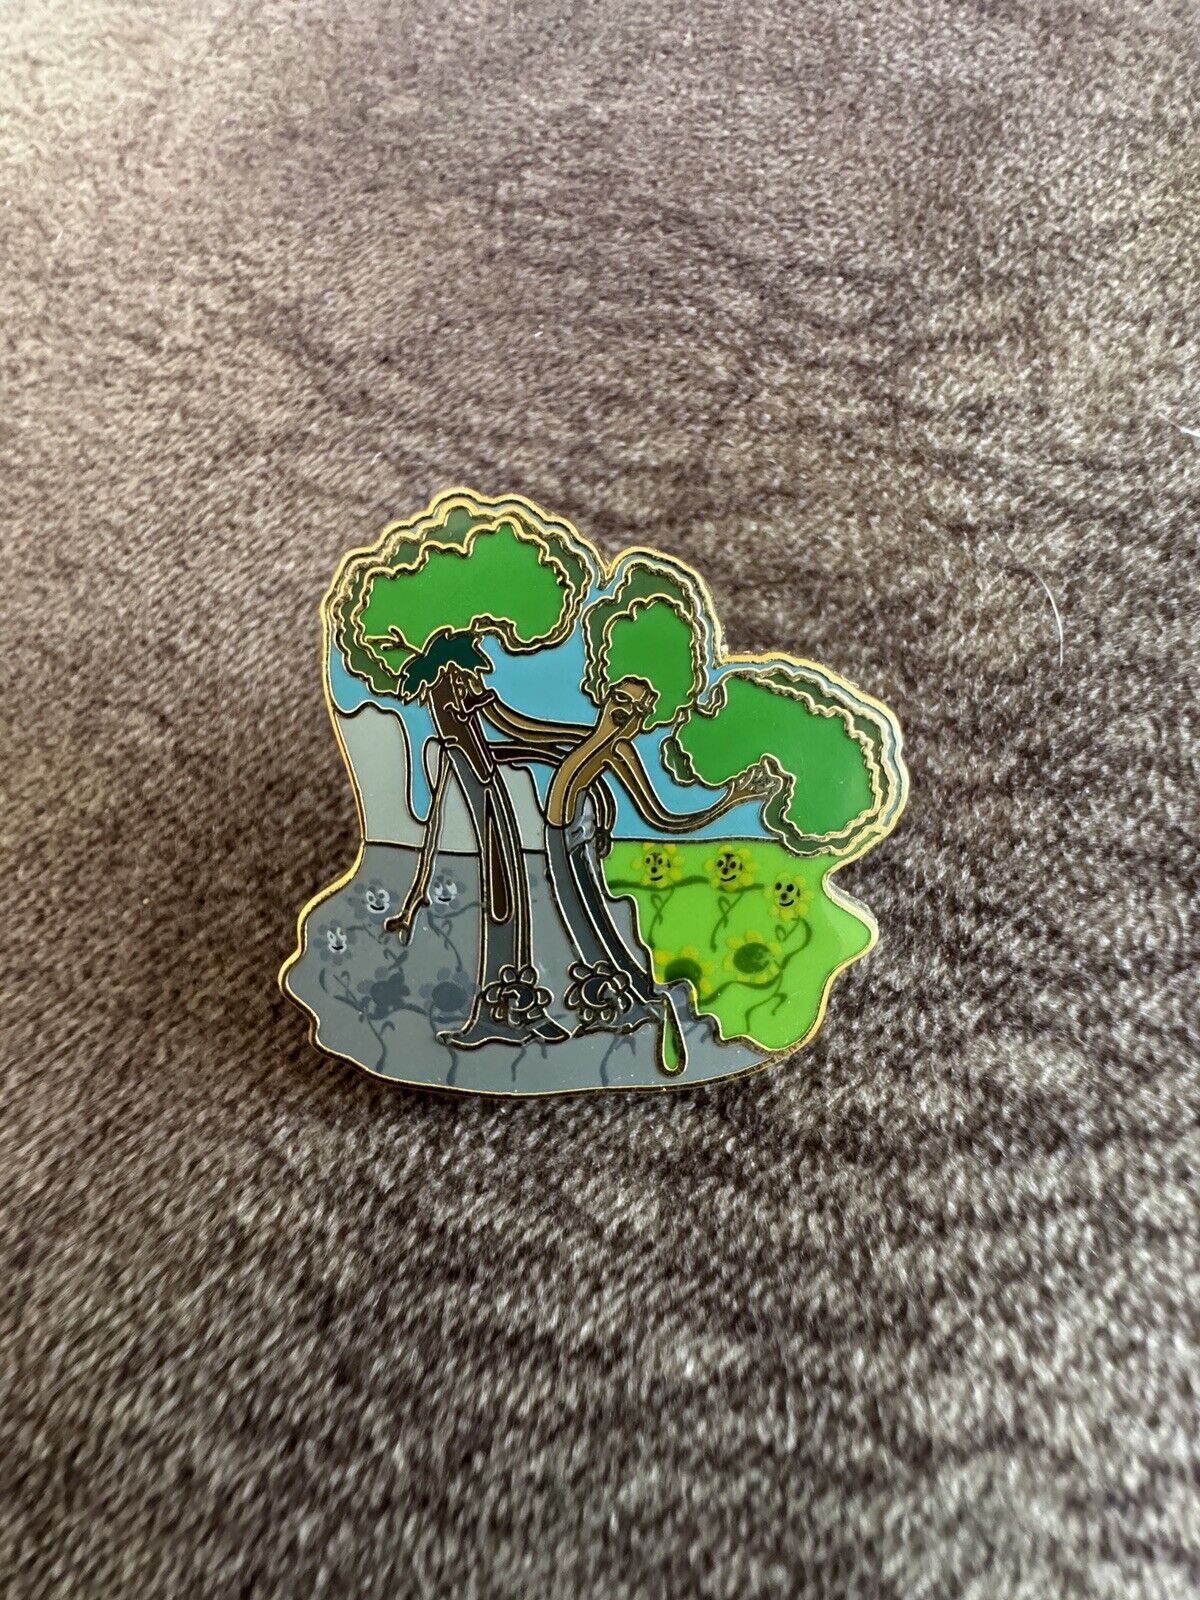 A Family Pin Gathering 2004 Flowers and Trees Alex Maher LE 200 Disney Pin